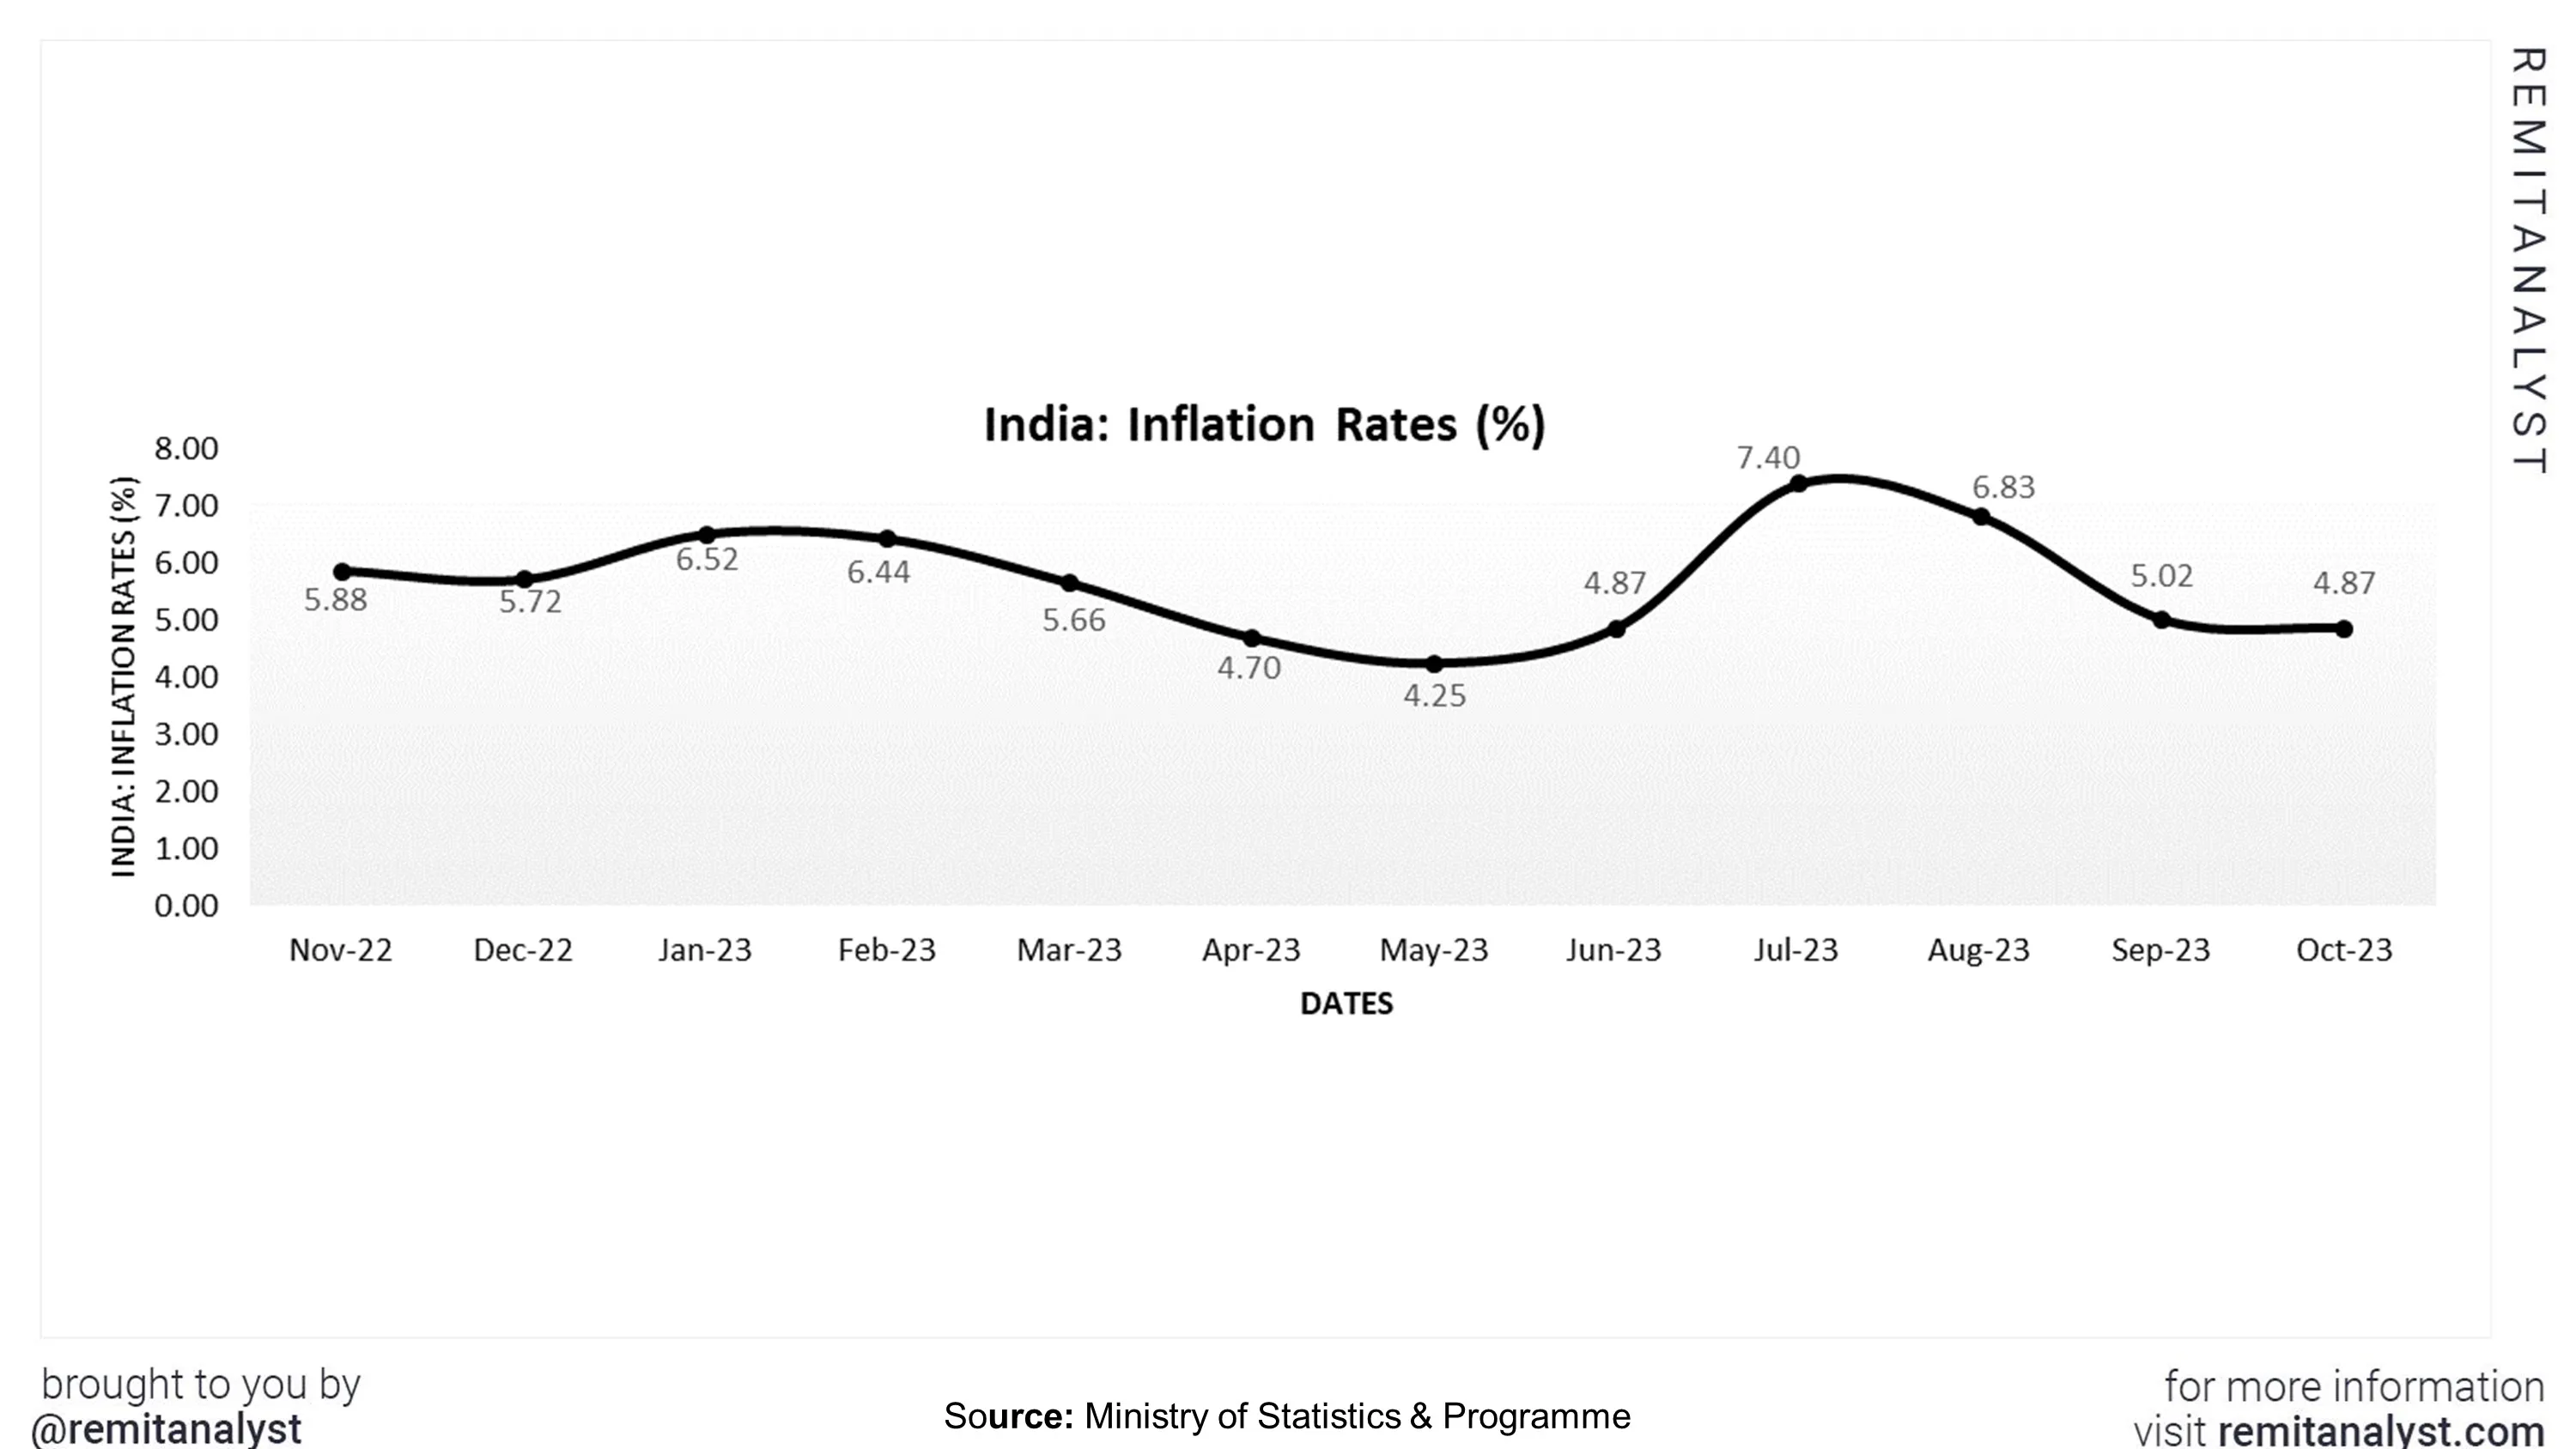 inflation-rates-india-from-nov-2022-to-oct-2023